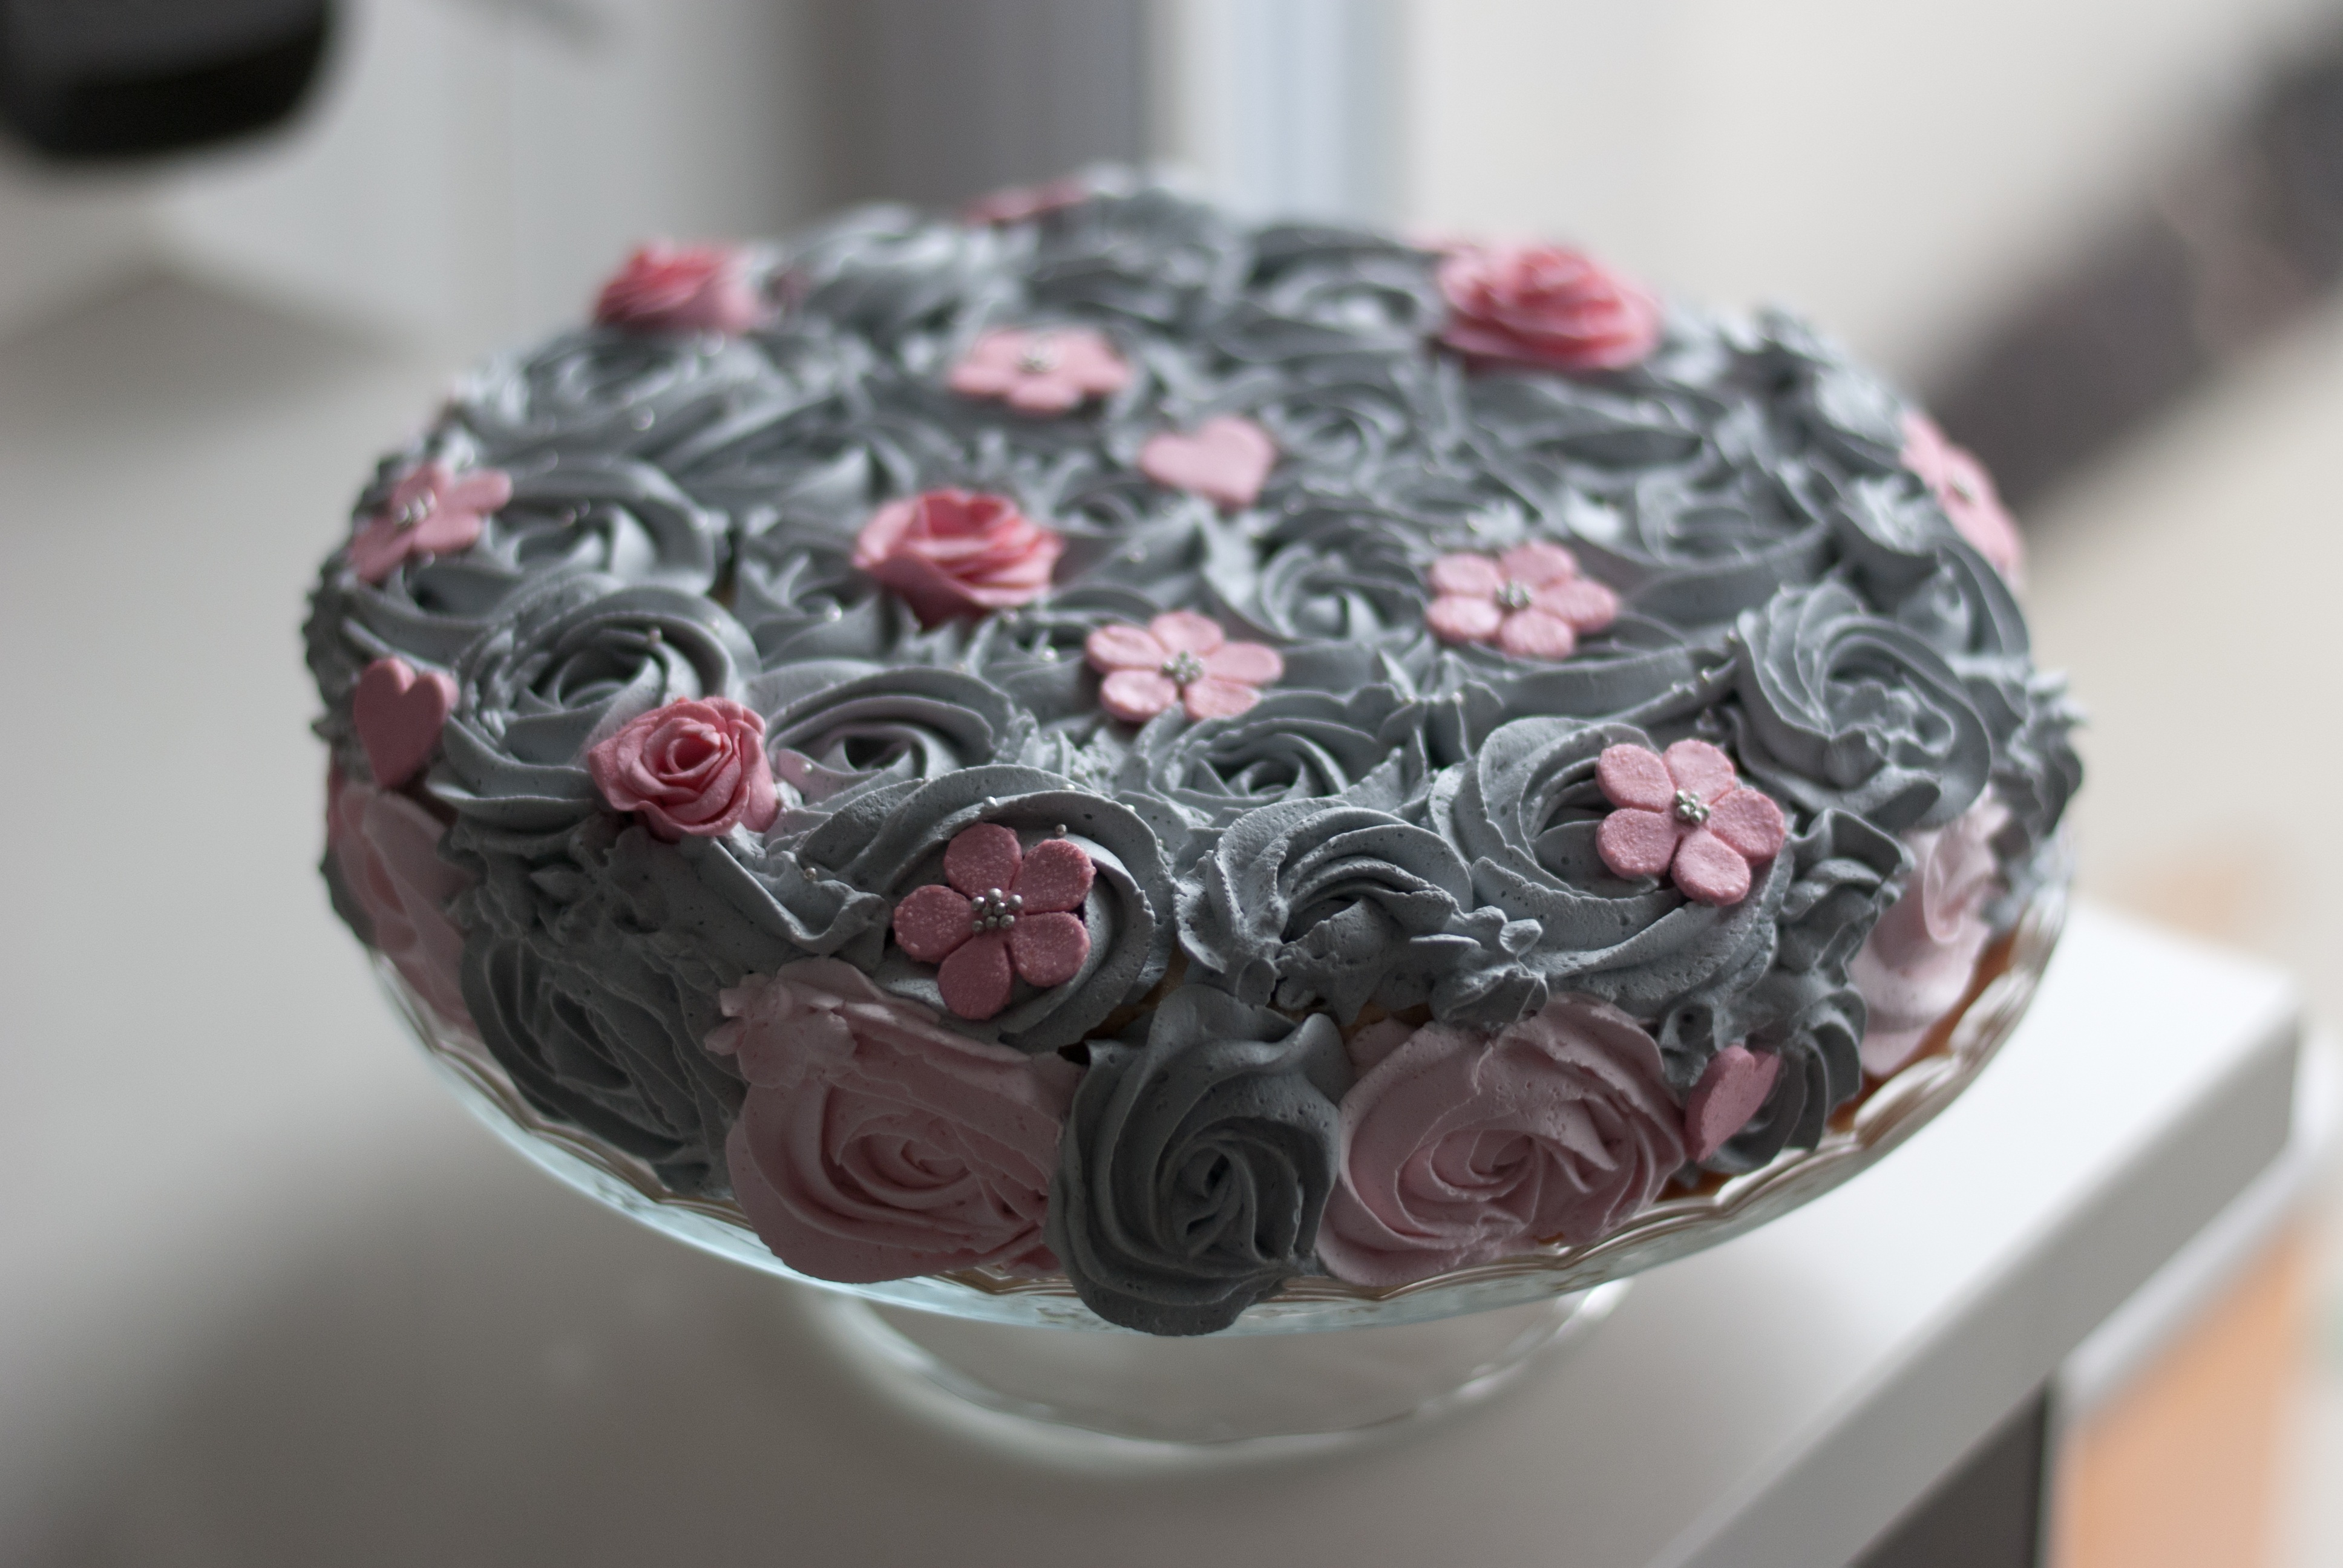 Delicious cake decorated with icing flowers